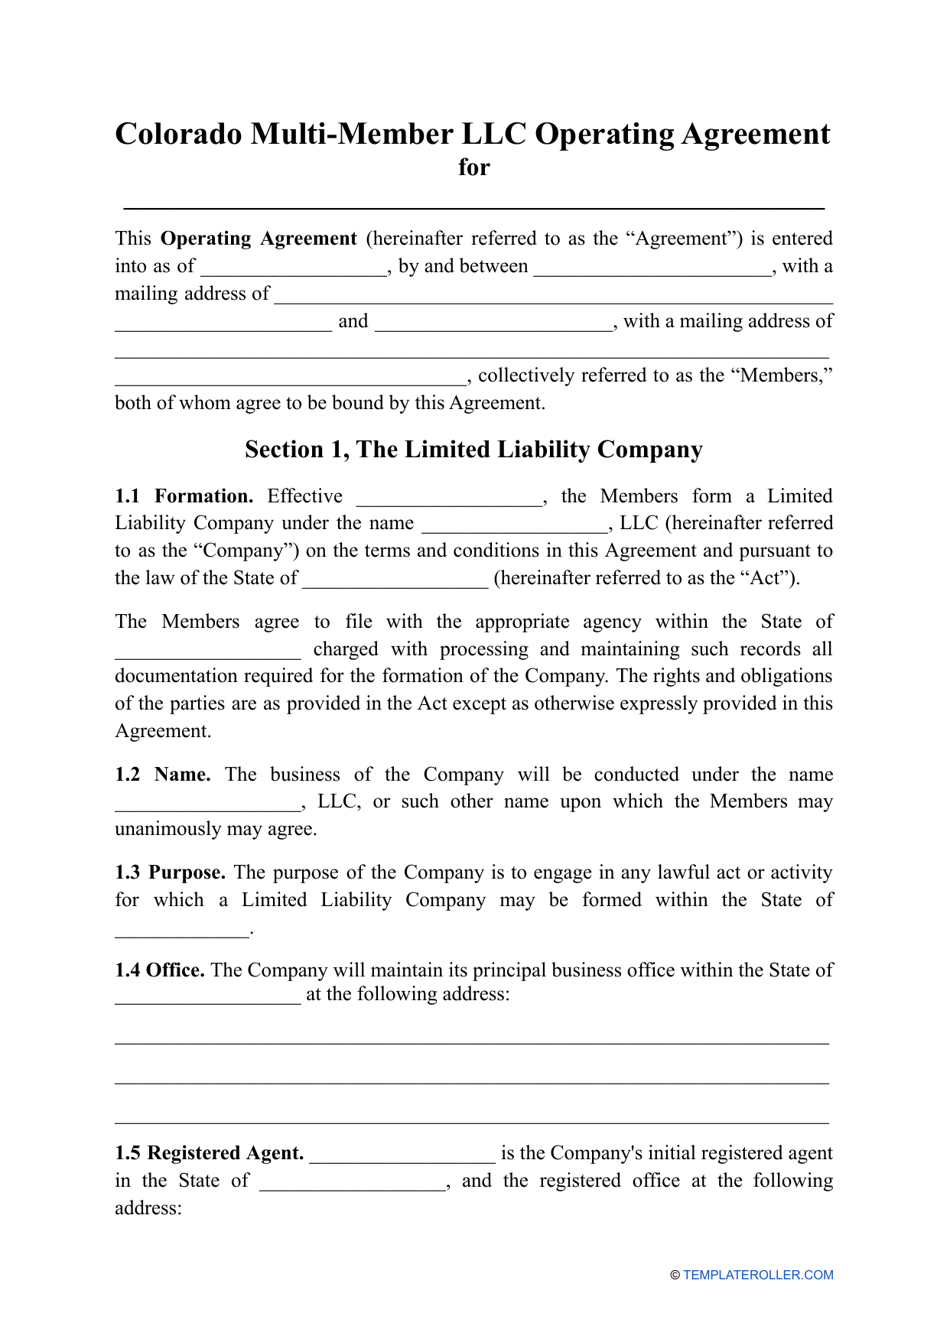 Multi-Member LLC Operating Agreement Template - Colorado, Page 1